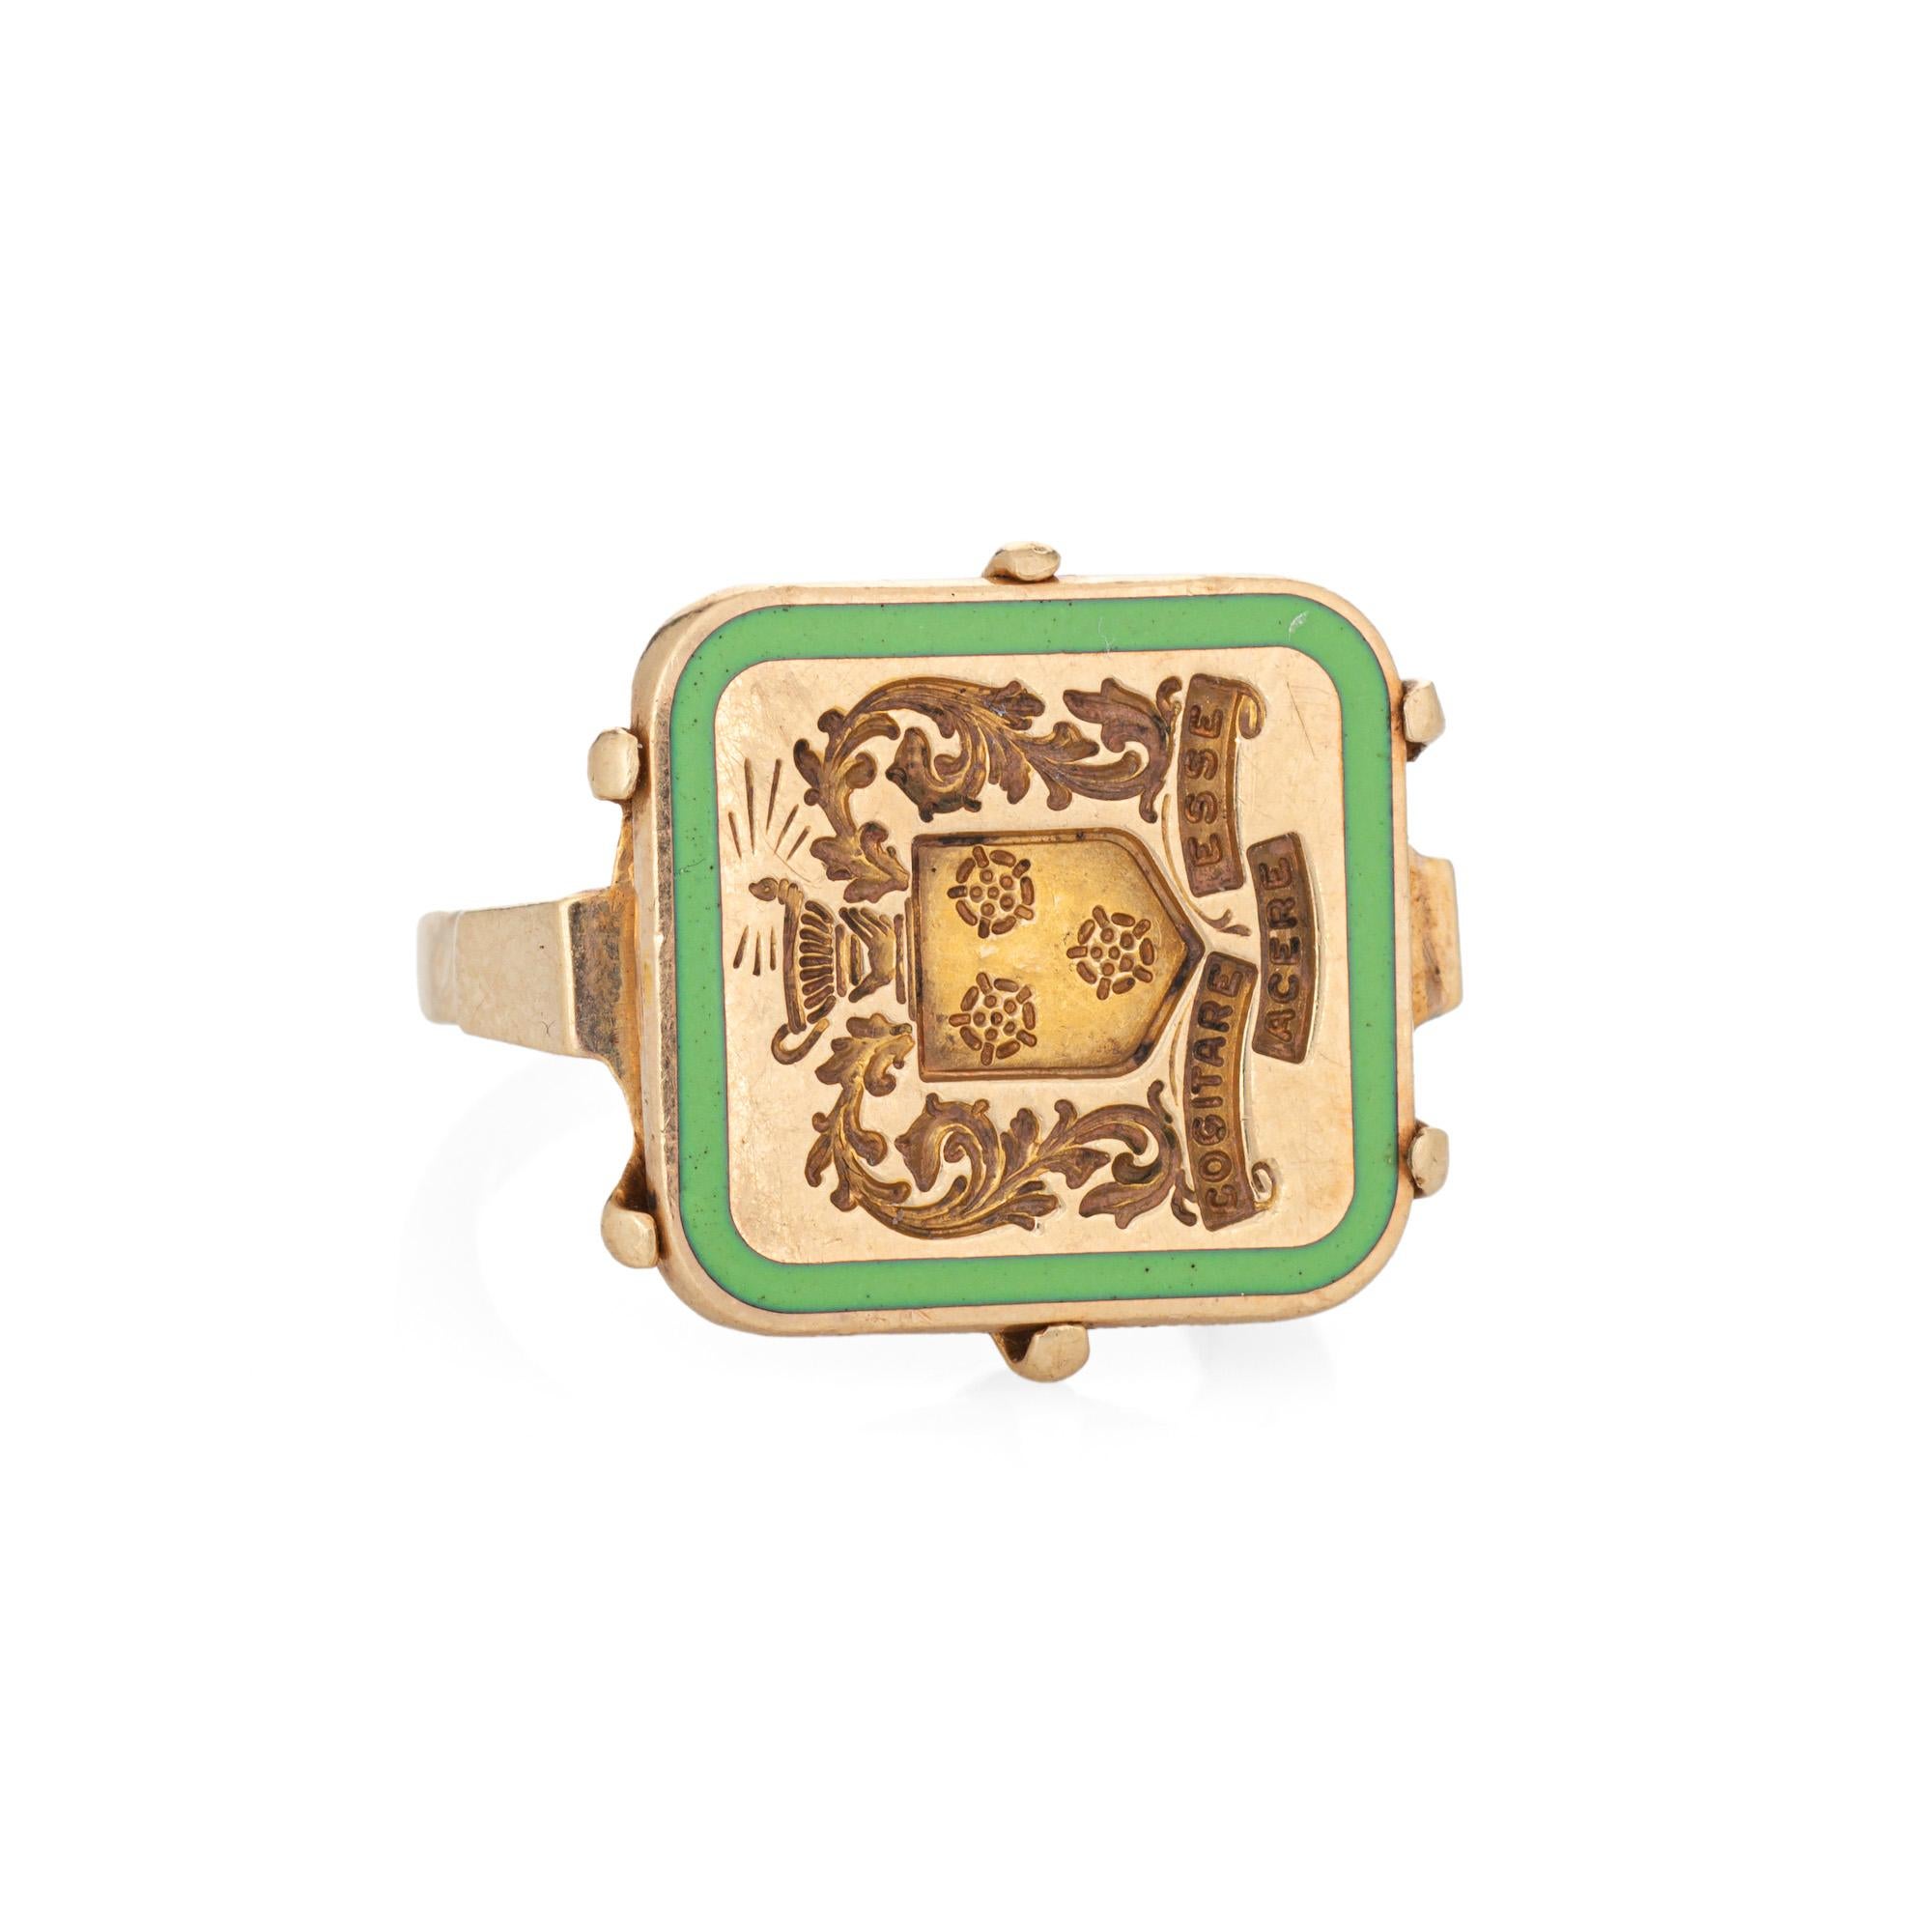 Finely detailed vintage Art Deco era family crest signet ring (circa 1920s to 1930s) crafted in 14 karat yellow gold. 

The elaborate signet mount, framed with green enamel, features a foliate motif with possibly an urn or decorative pot to the top